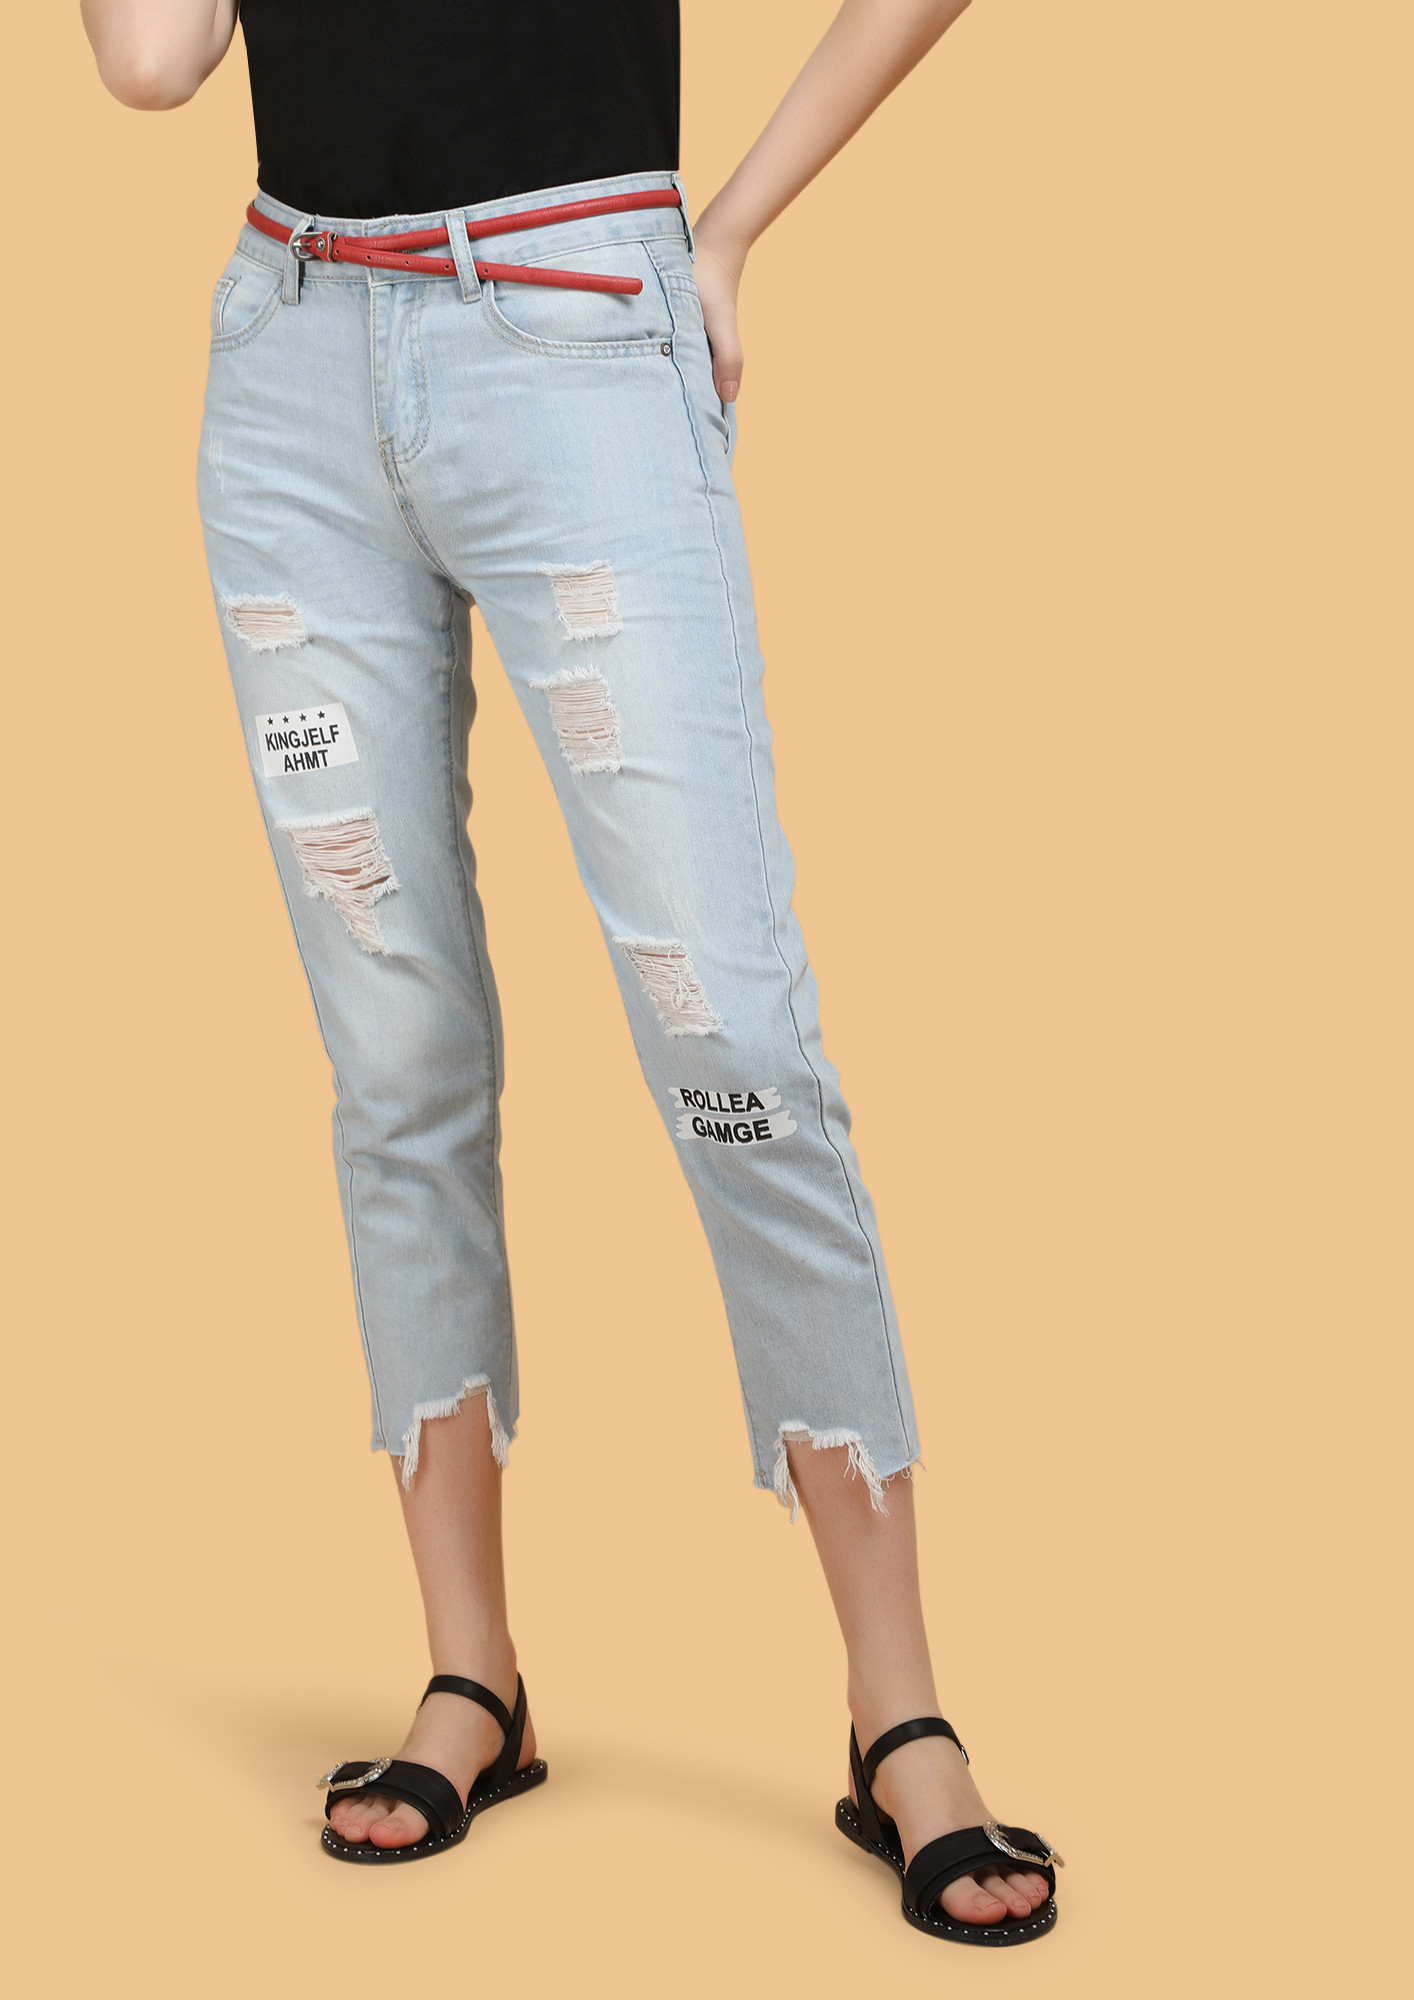 TEXT ME ON LIGHT BLUE CROPPED JEANS